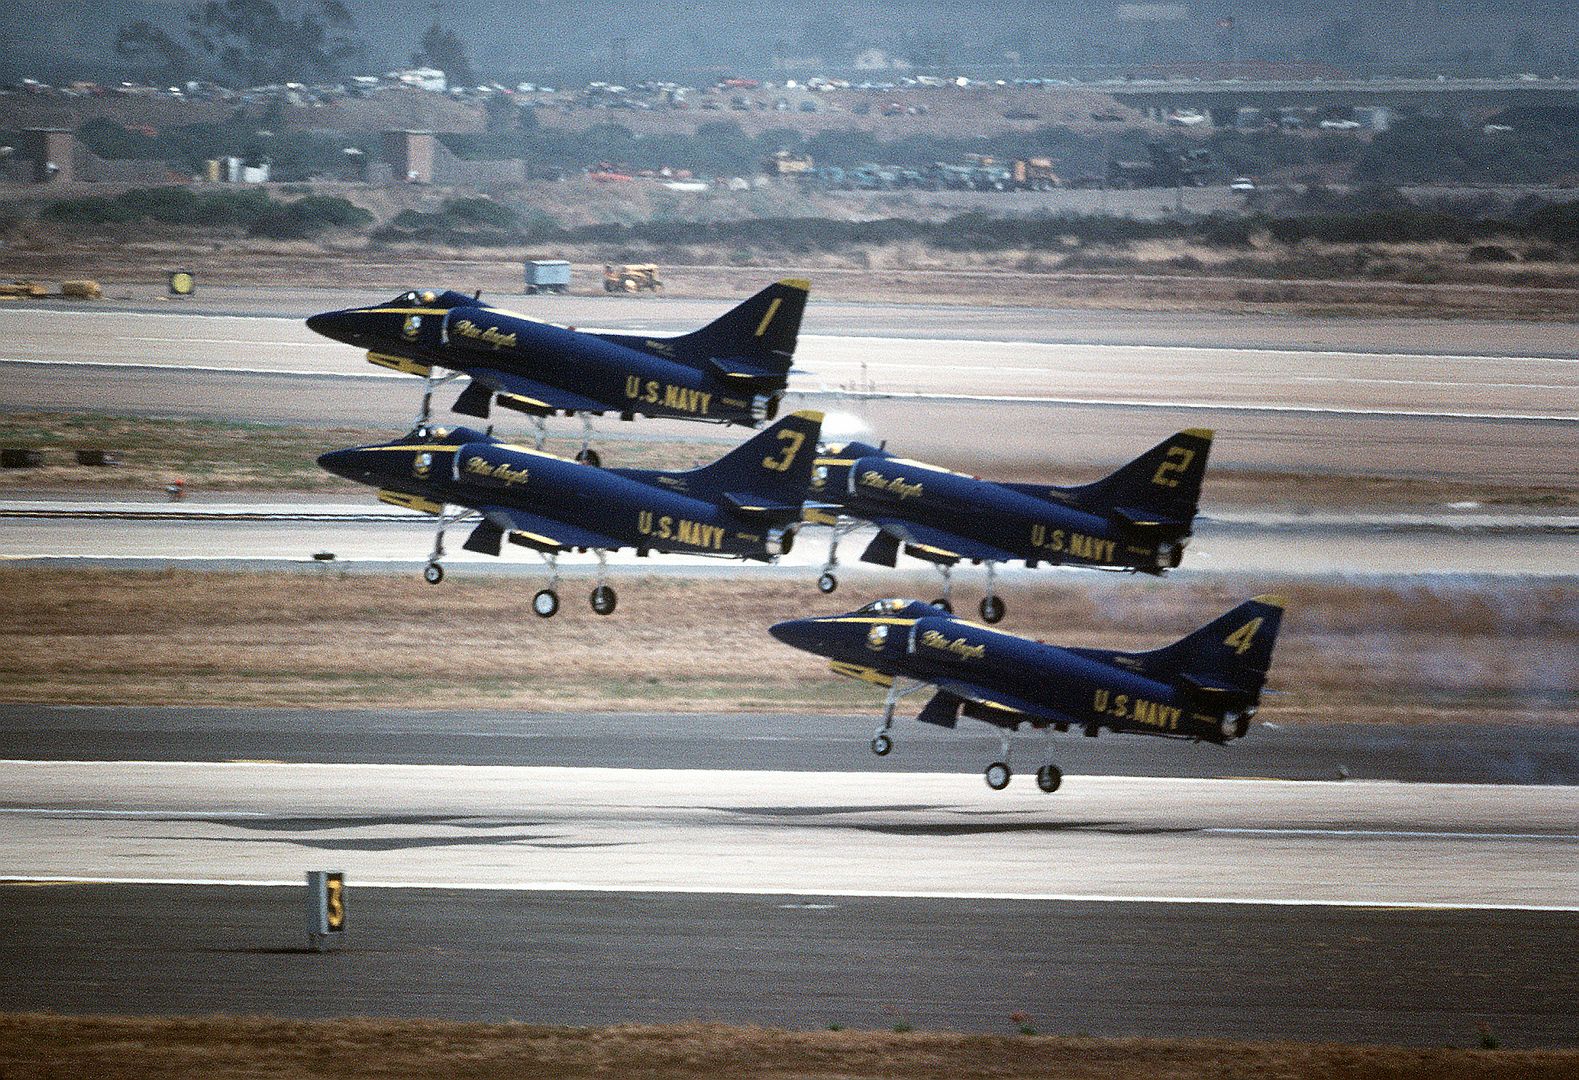 S Blue Angels Flight Demonstration Team Take Off In Formation During The Air Show